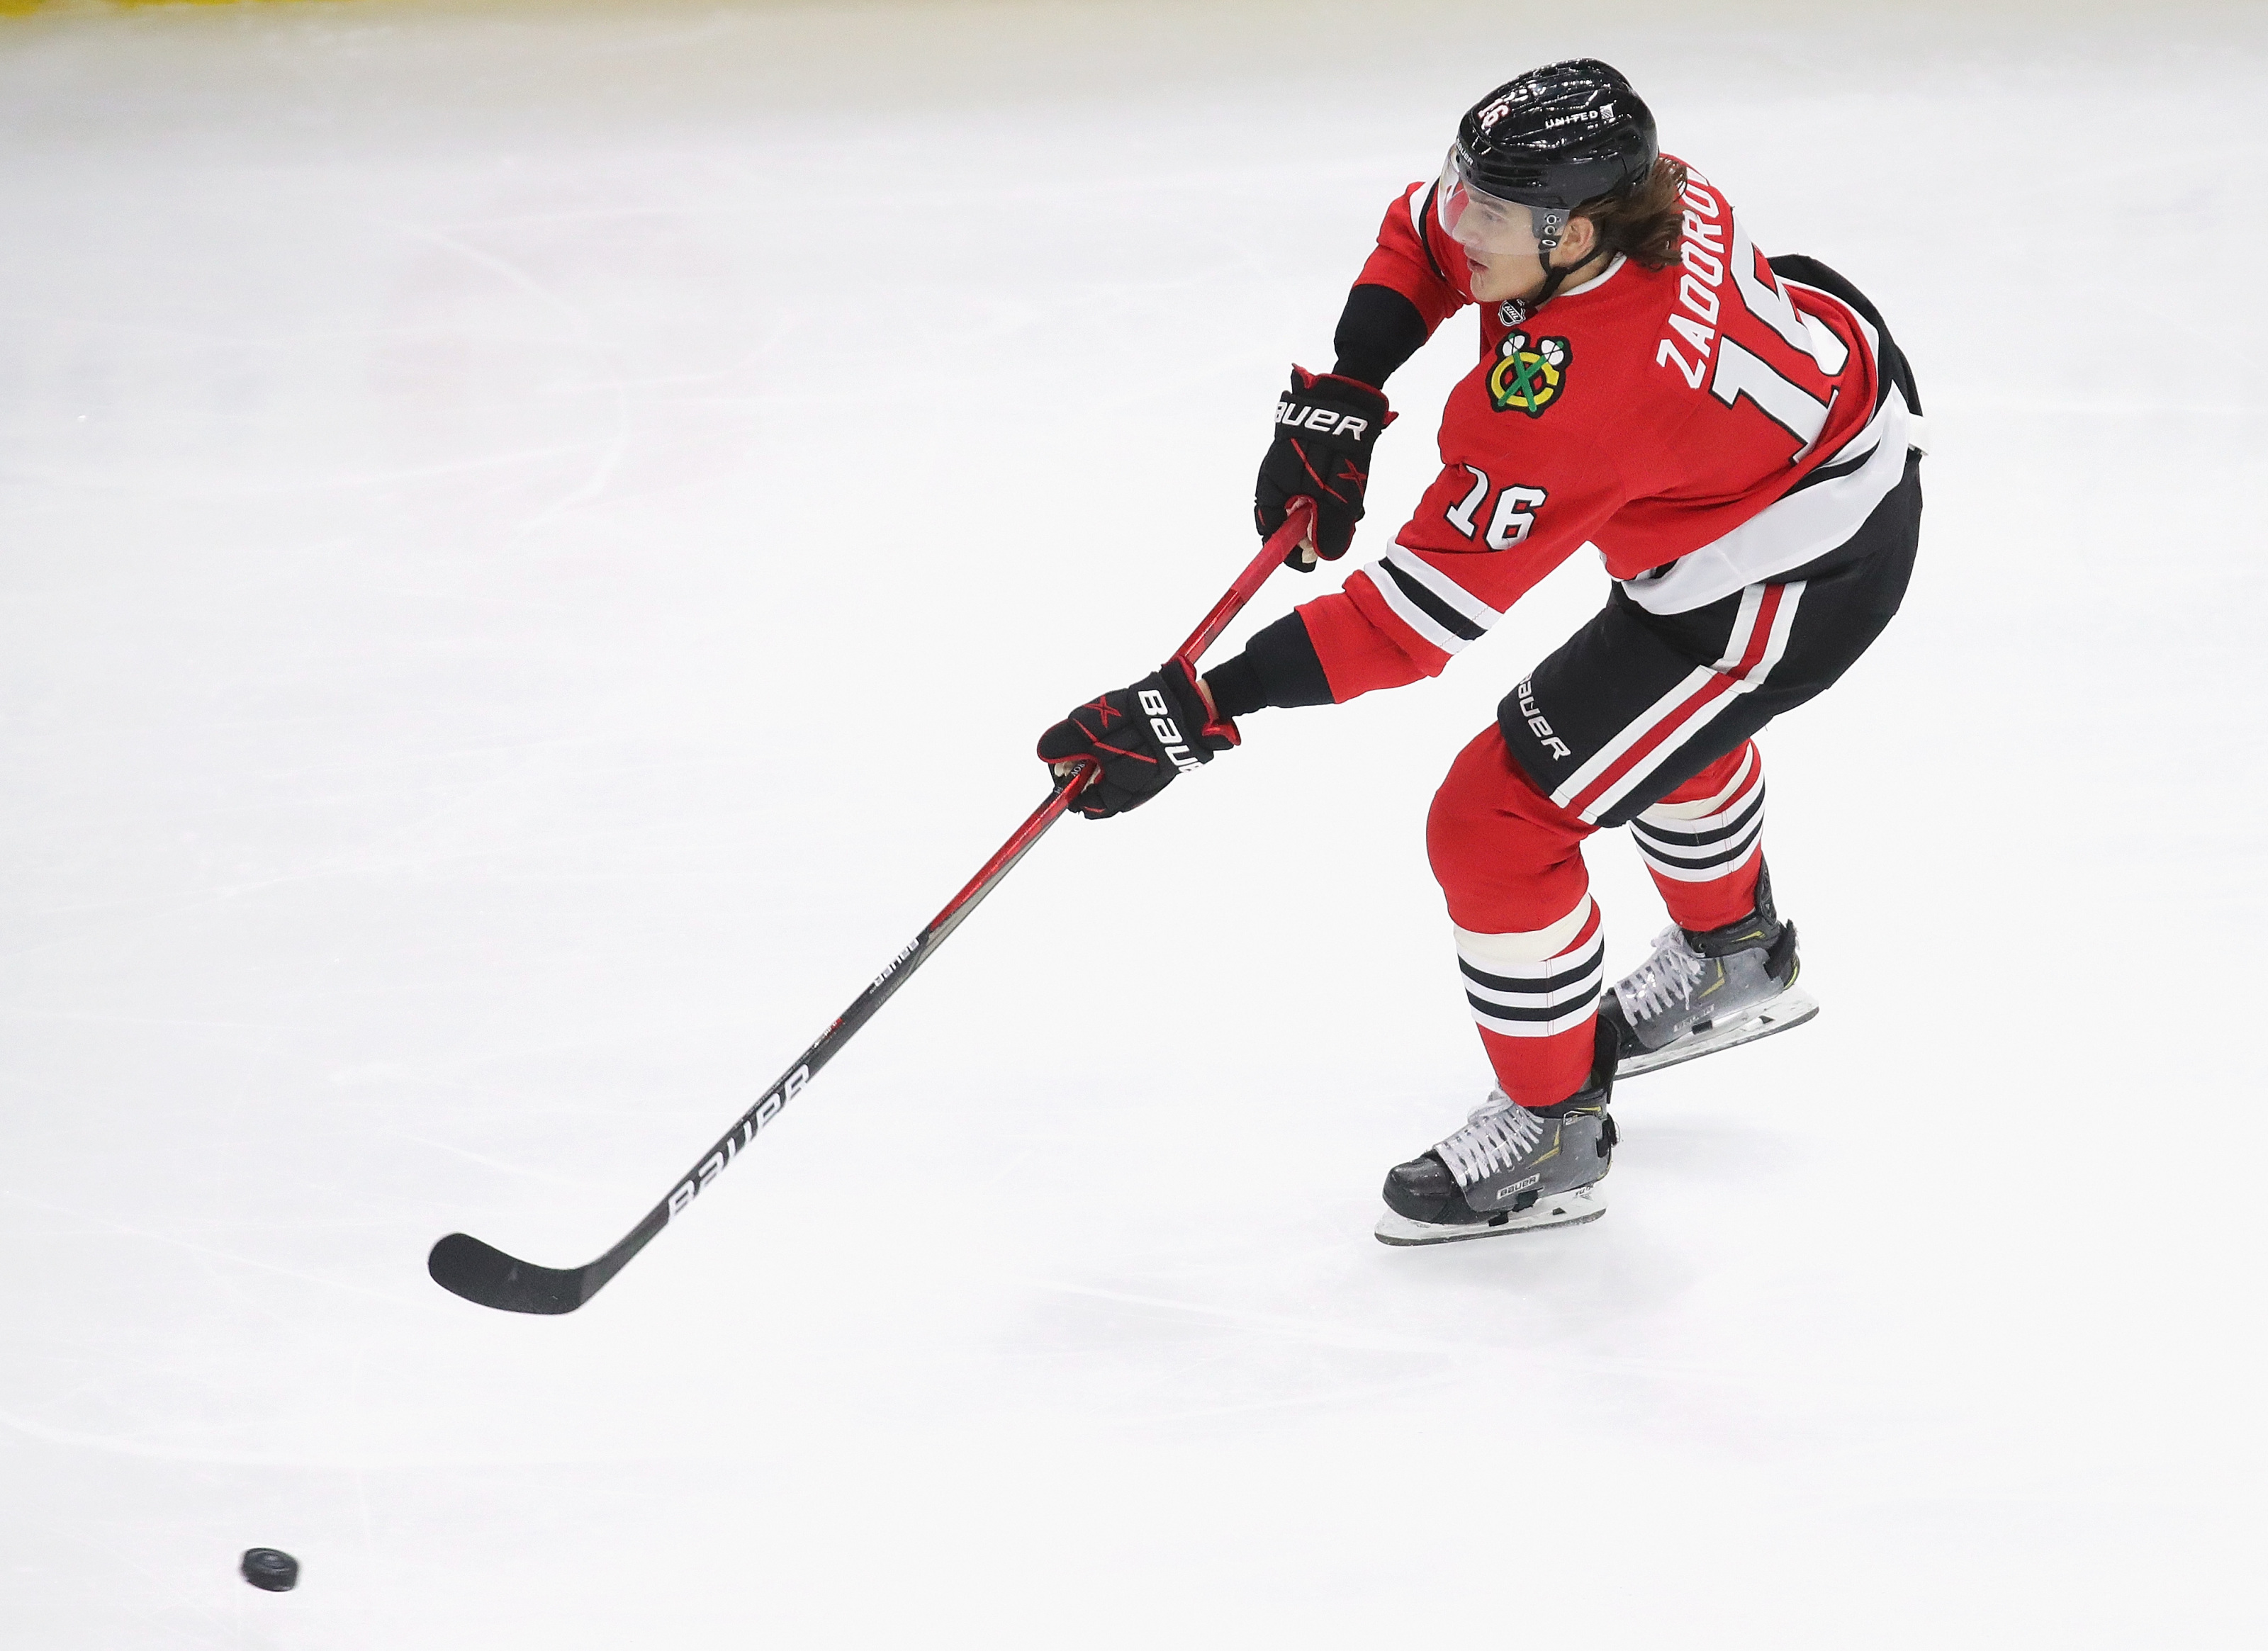 Chicago Blackhawks buy time and talent with Artemi Panarin extension